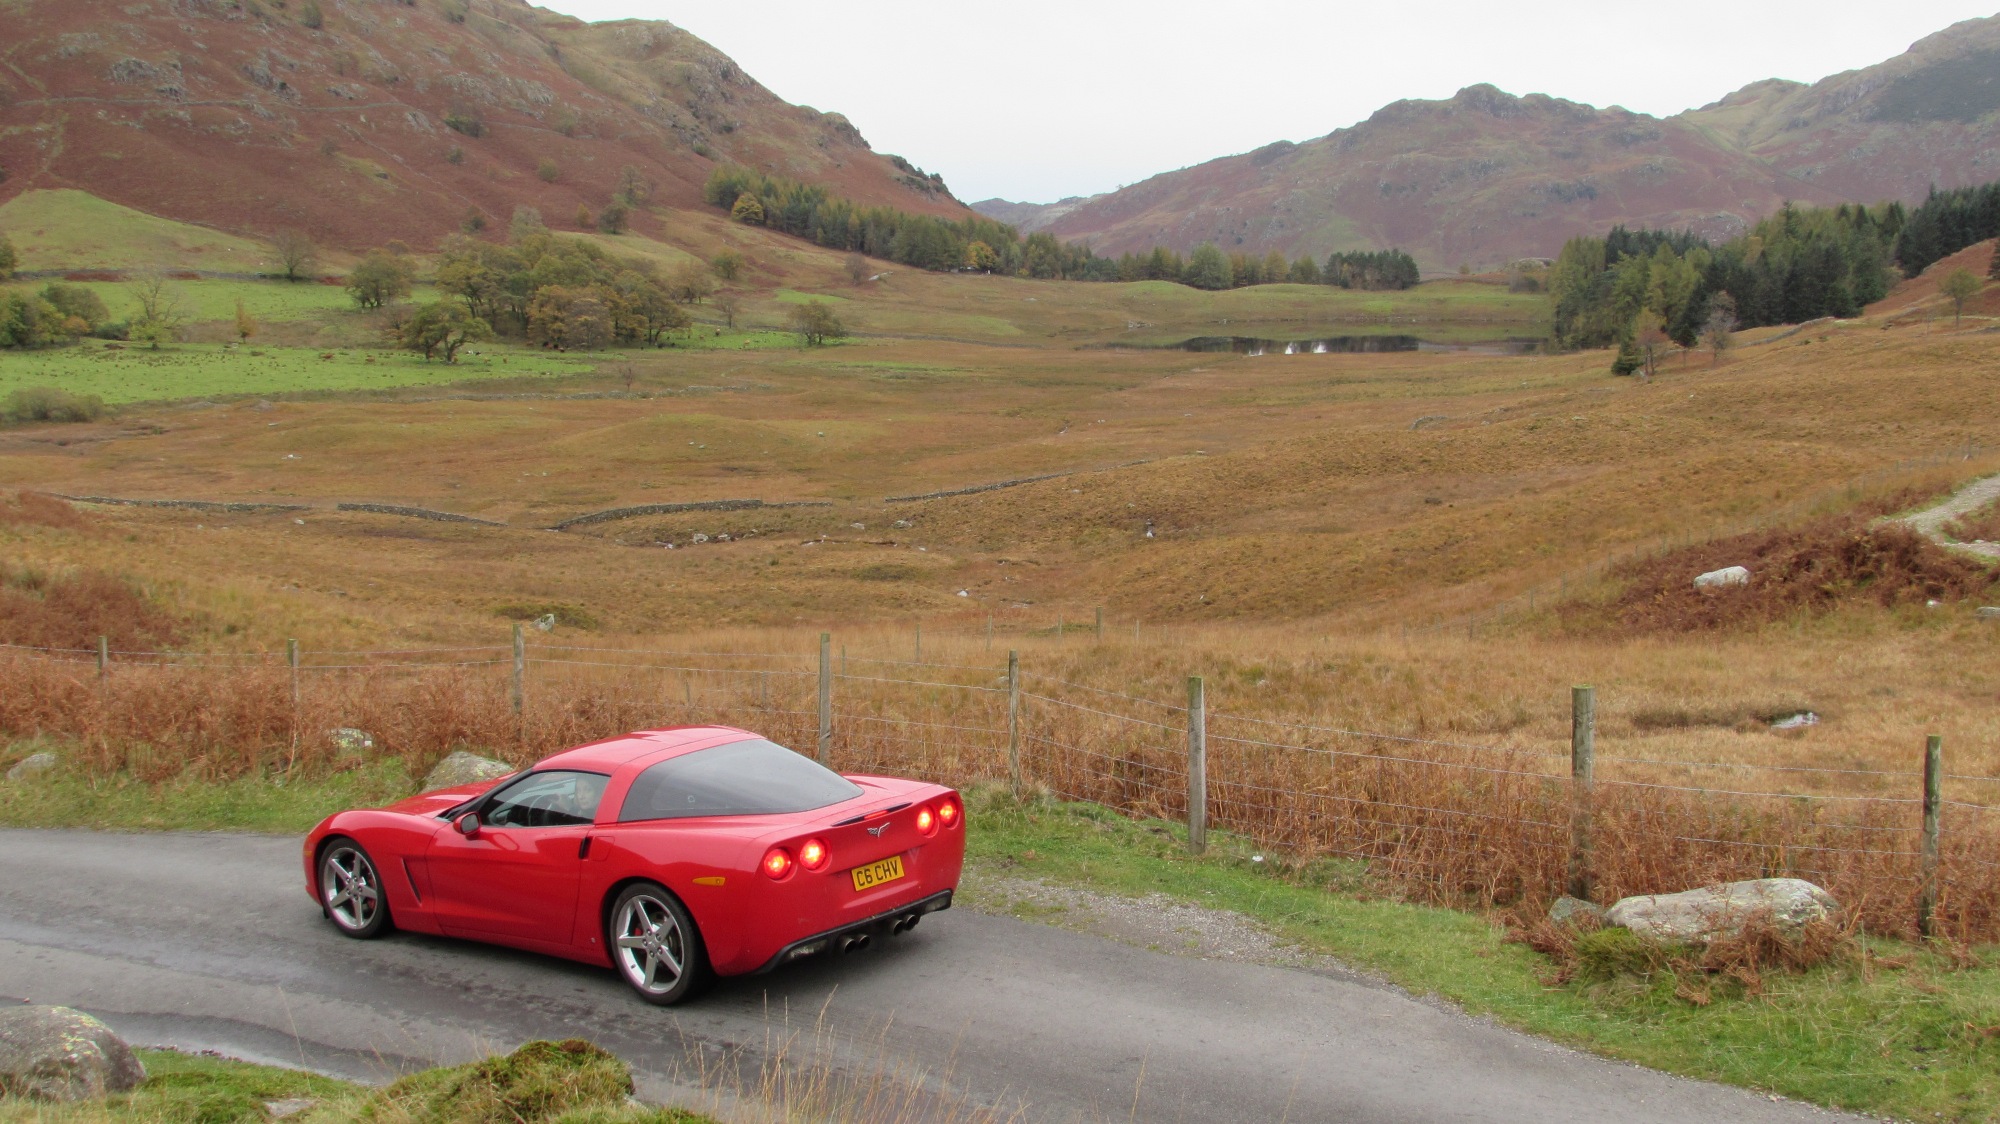 The £7700 Corvette C6 - Page 6 - Readers' Cars - PistonHeads